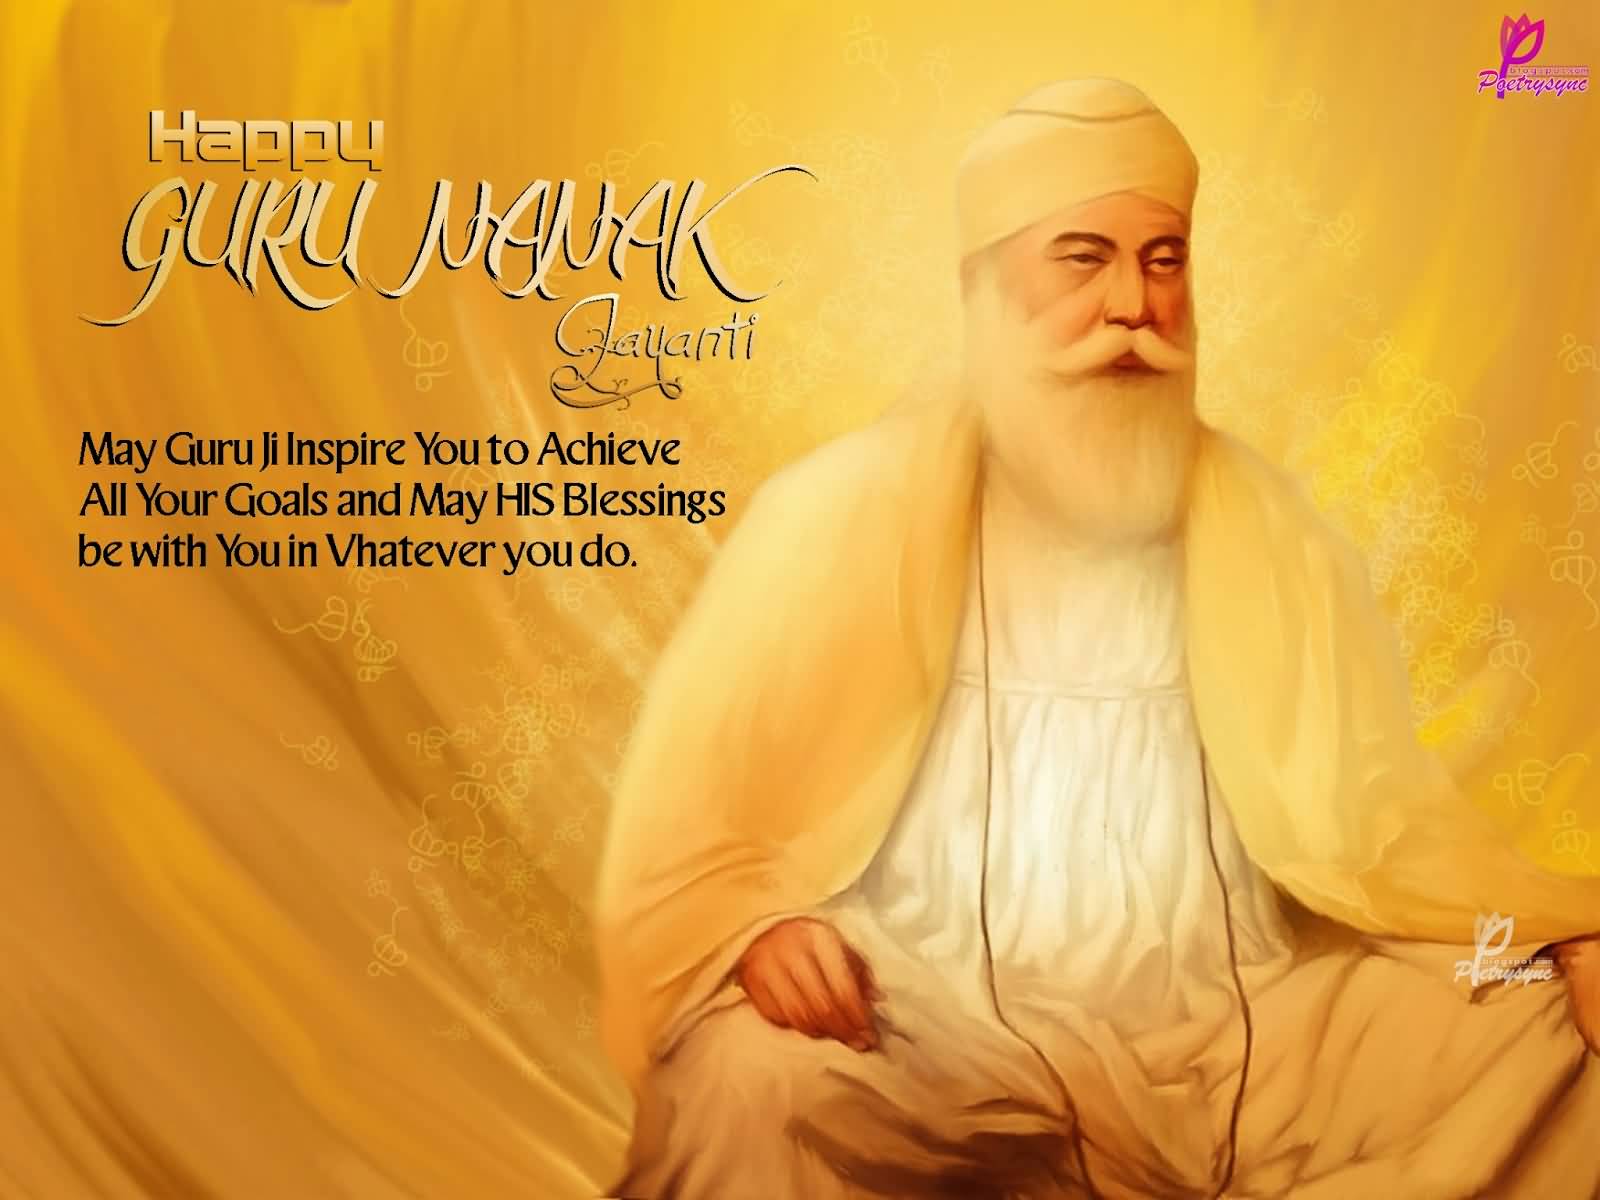 Happy Guru Nanak Jayanti May Guru Ji Inspire You To Achieve All Your Goals And May His Blessings Be With You In Whatever You Do